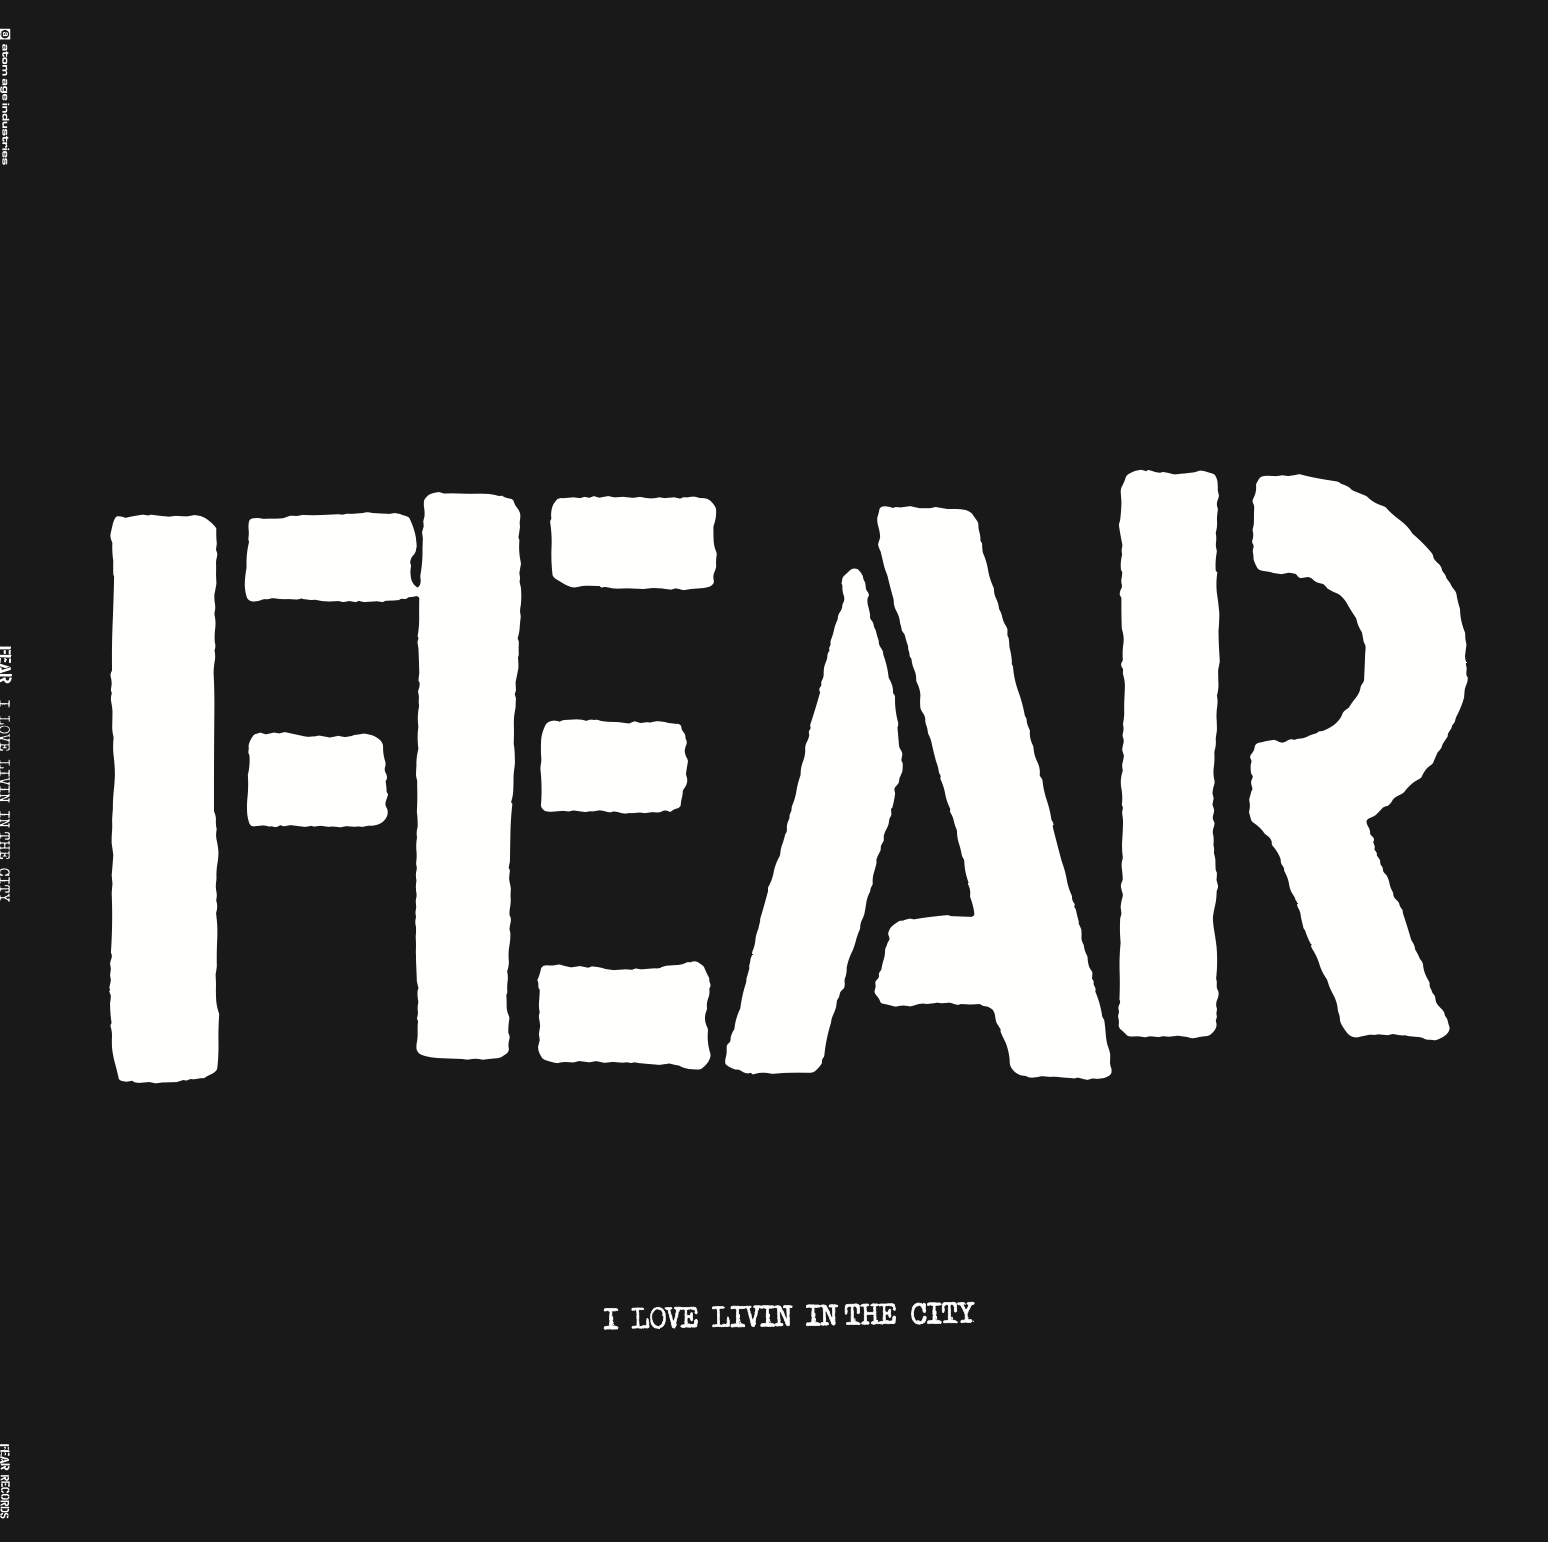 FEAR "I LOVE LIVING IN THE CITY" 12" VINYL EP